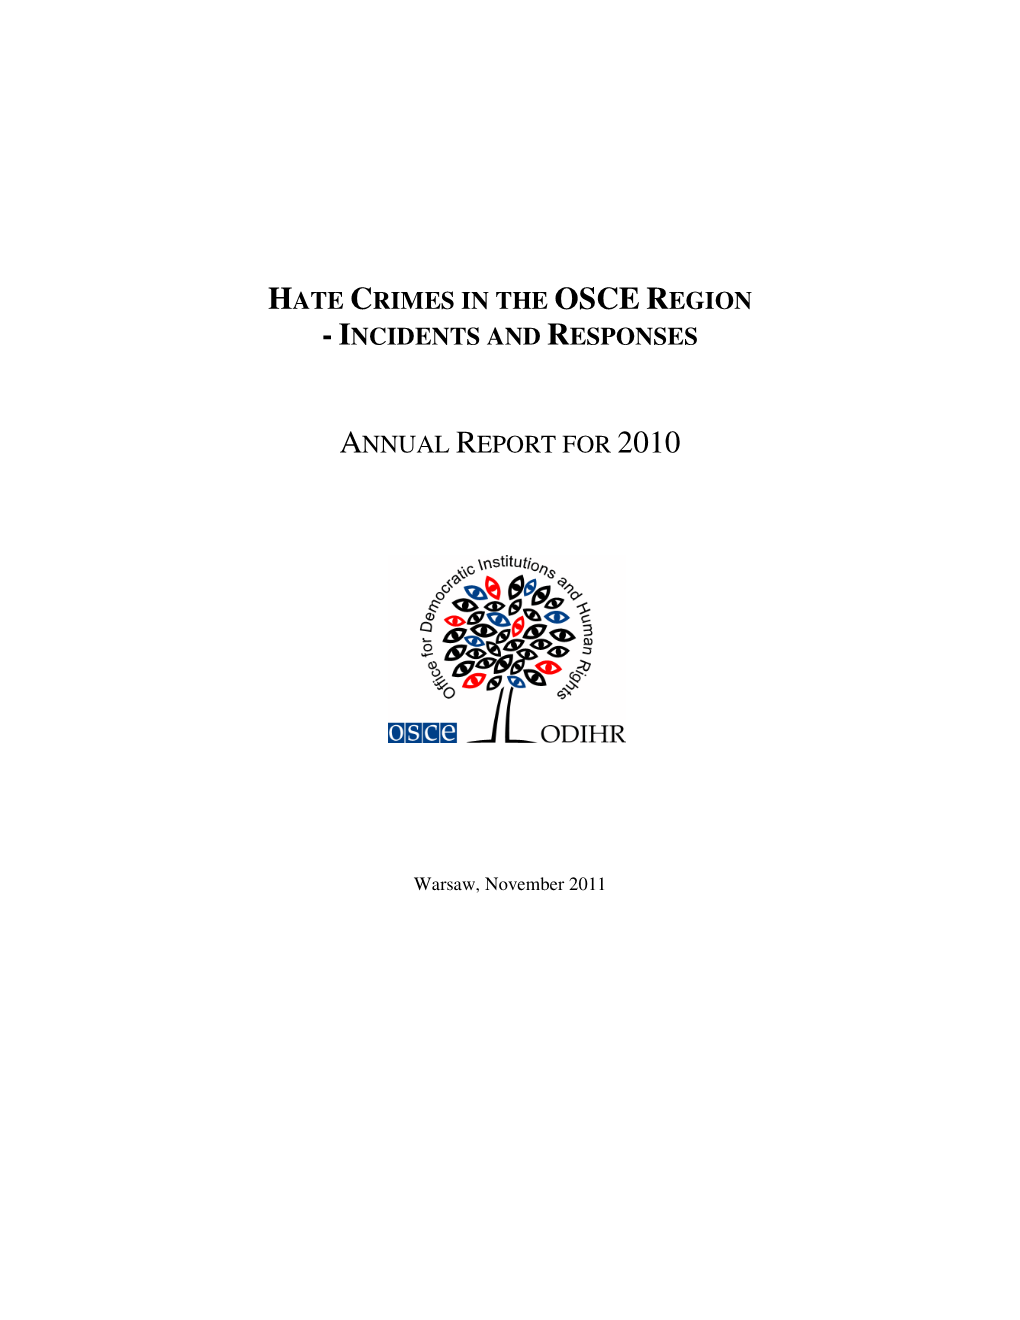 Hate Crimes in the Osce Region -Incidents and Responses